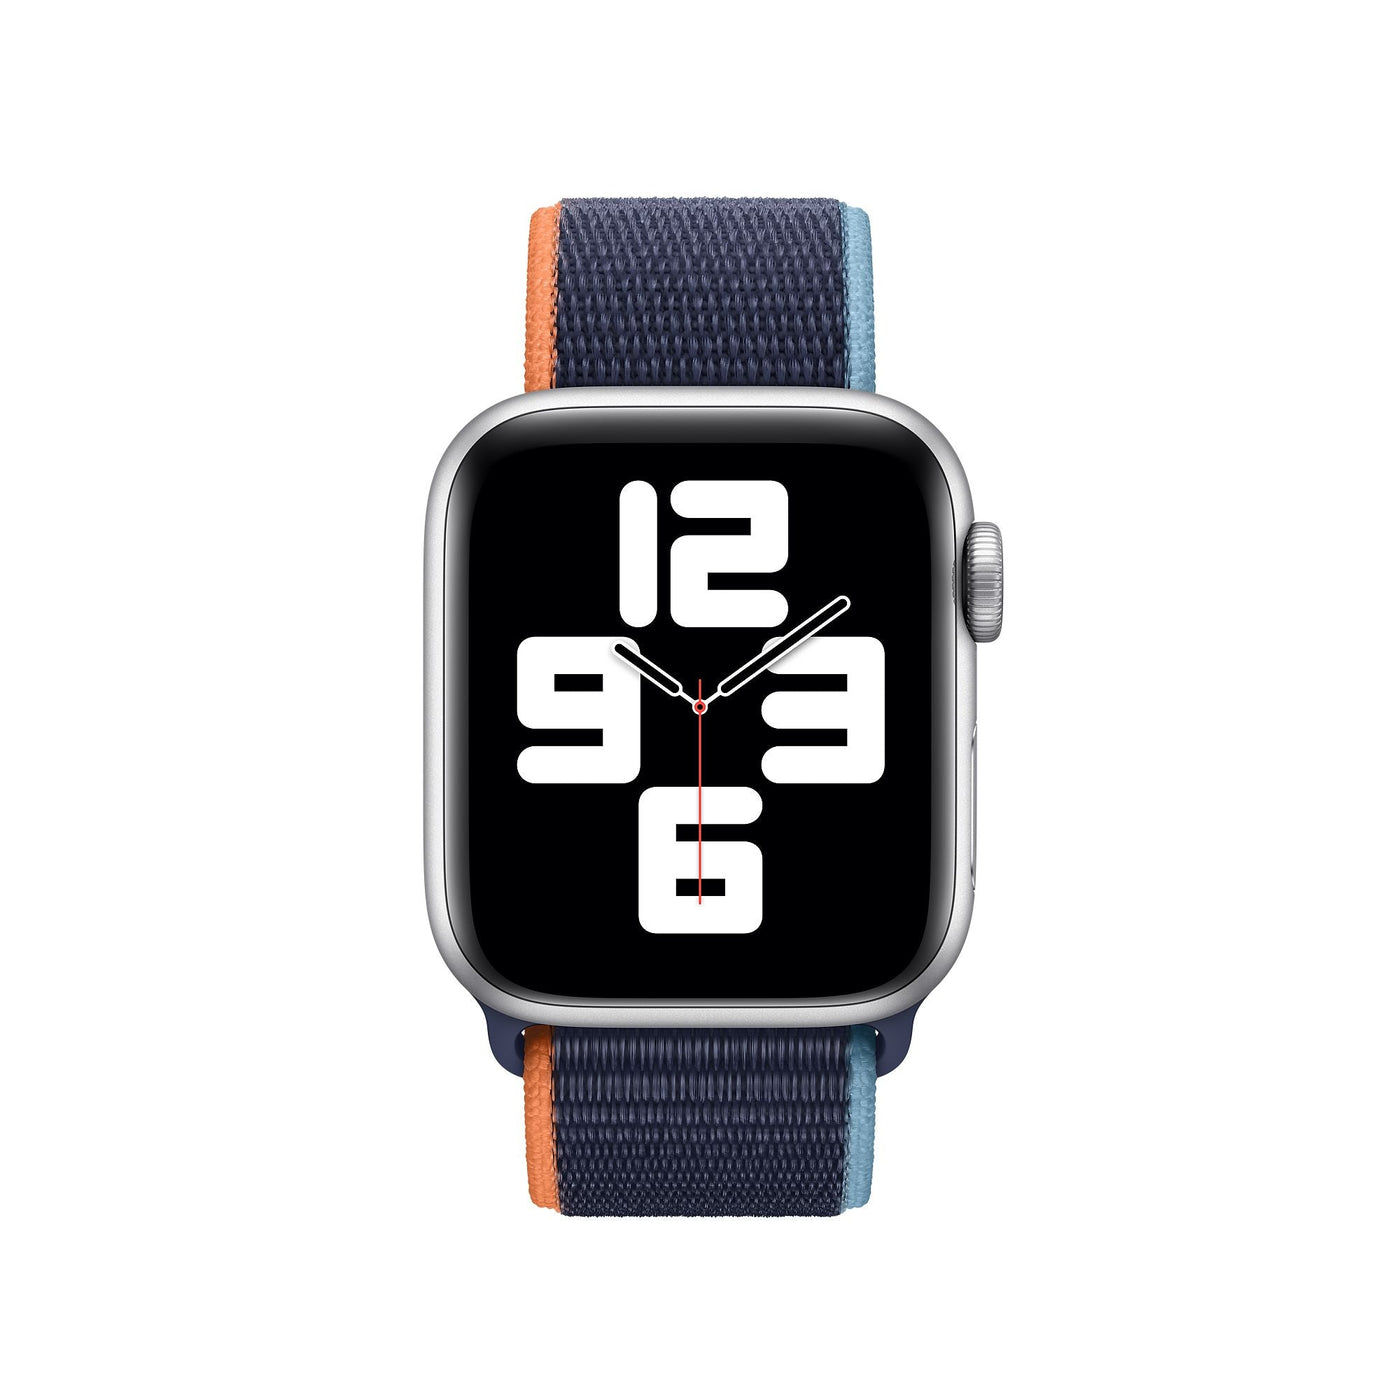 ALK Classic Nylon Band for Apple Watch in Deep Navy - Alk Designs